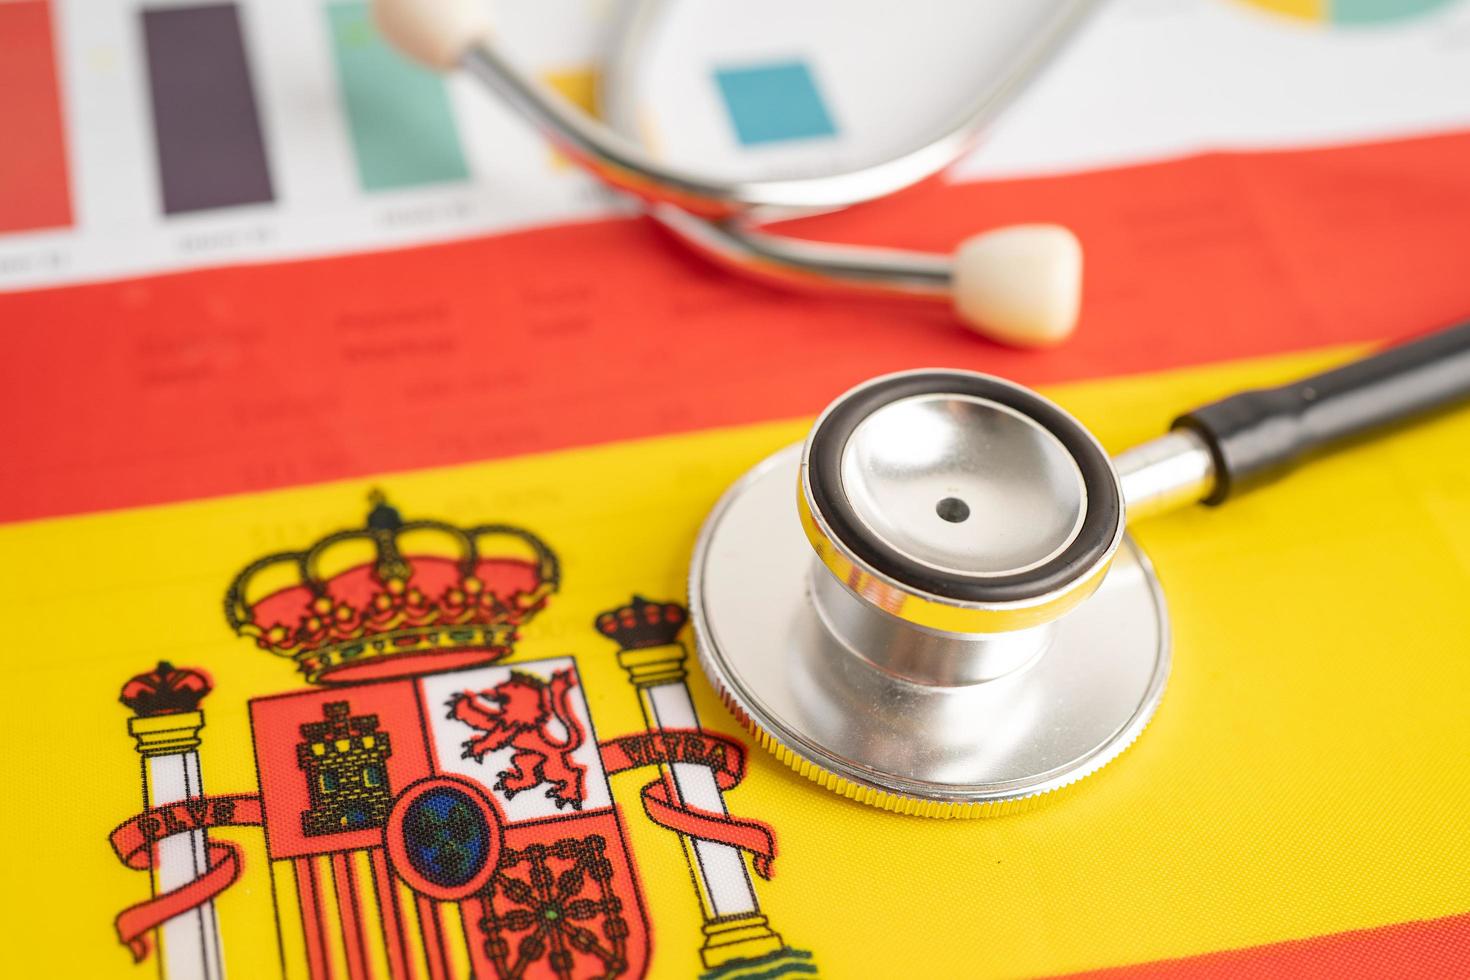 Black stethoscope on Spain flag background, Business and finance concept. photo